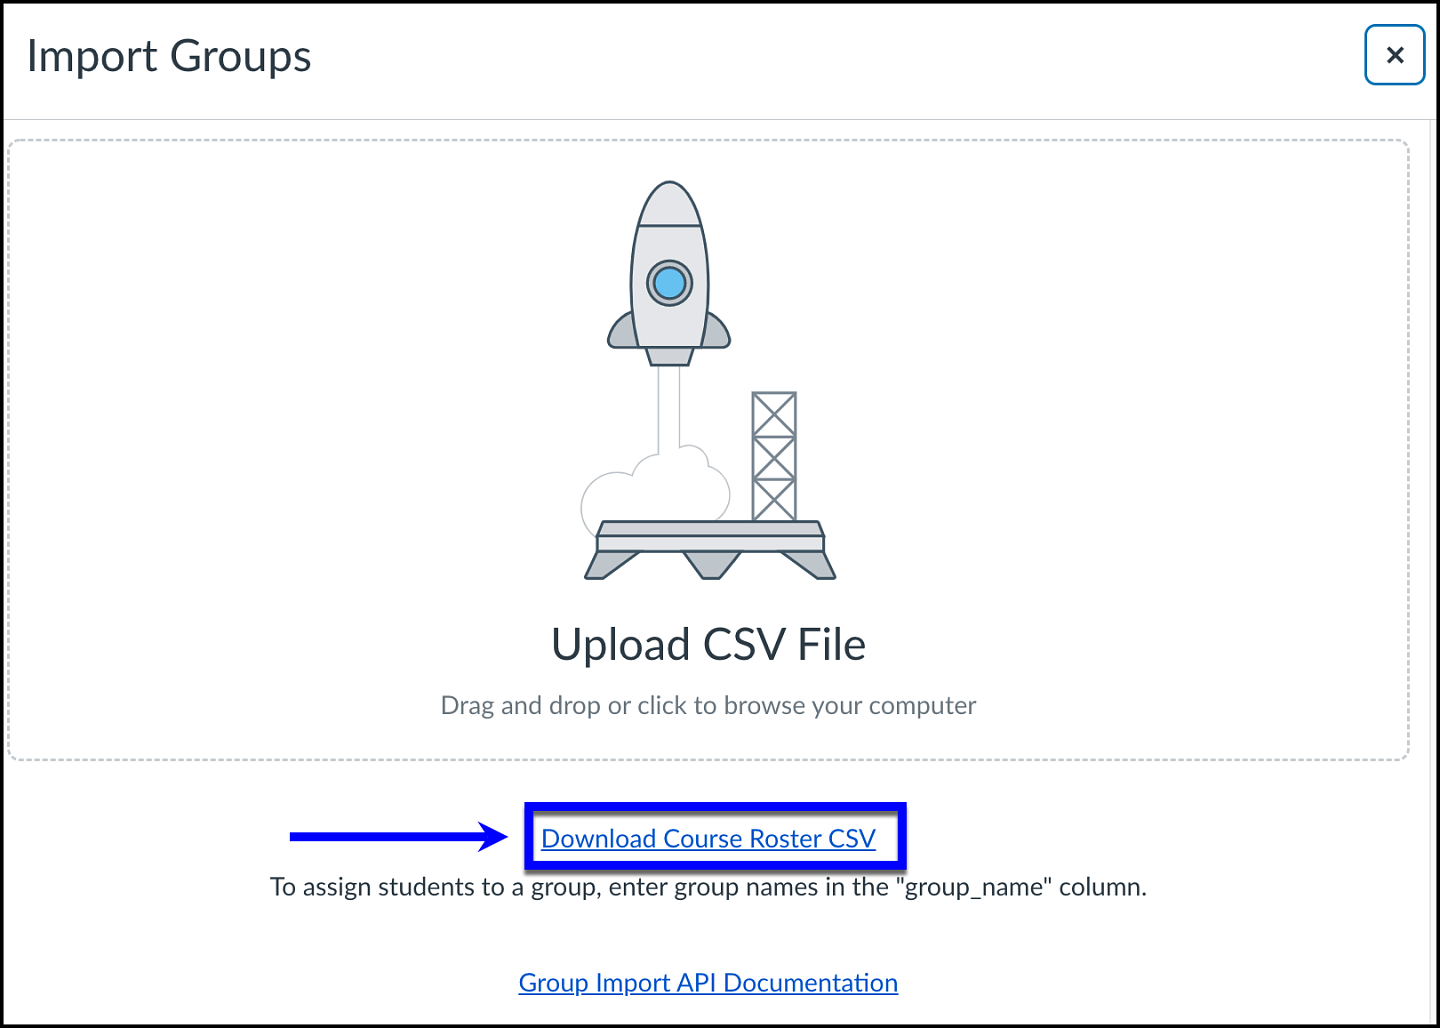 Canvas import groups download course roster csv link